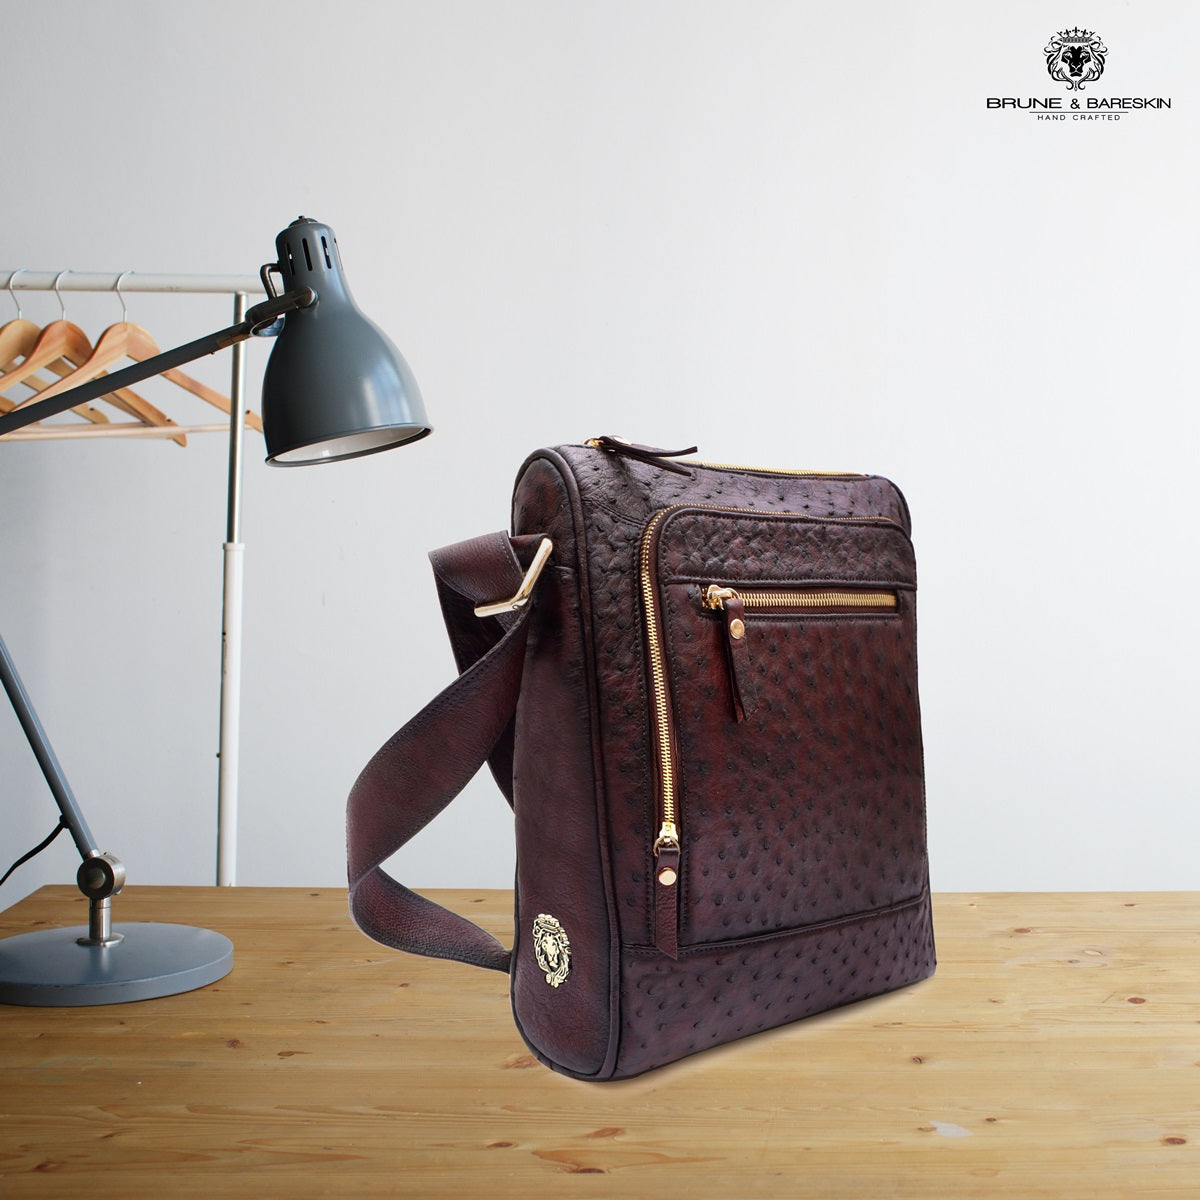 Crossbody Multi-Pocket Leather Bag in Dark Brown Real Ostrich With Lion Logo